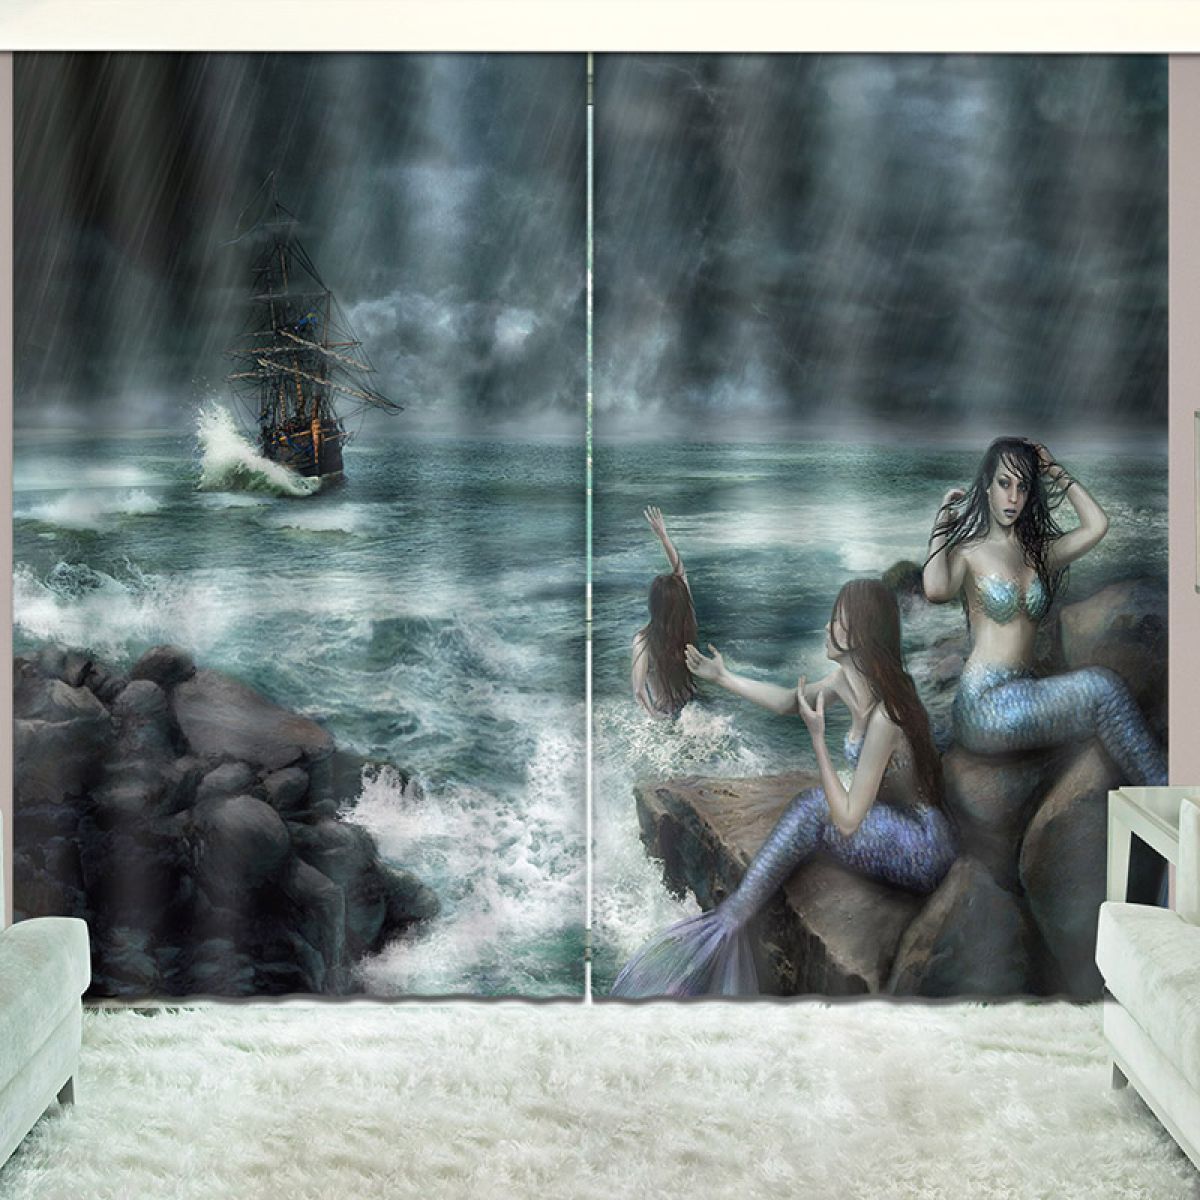 Mermaid And Boat In The Storm Patterned Printed Window Curtain Home Decor